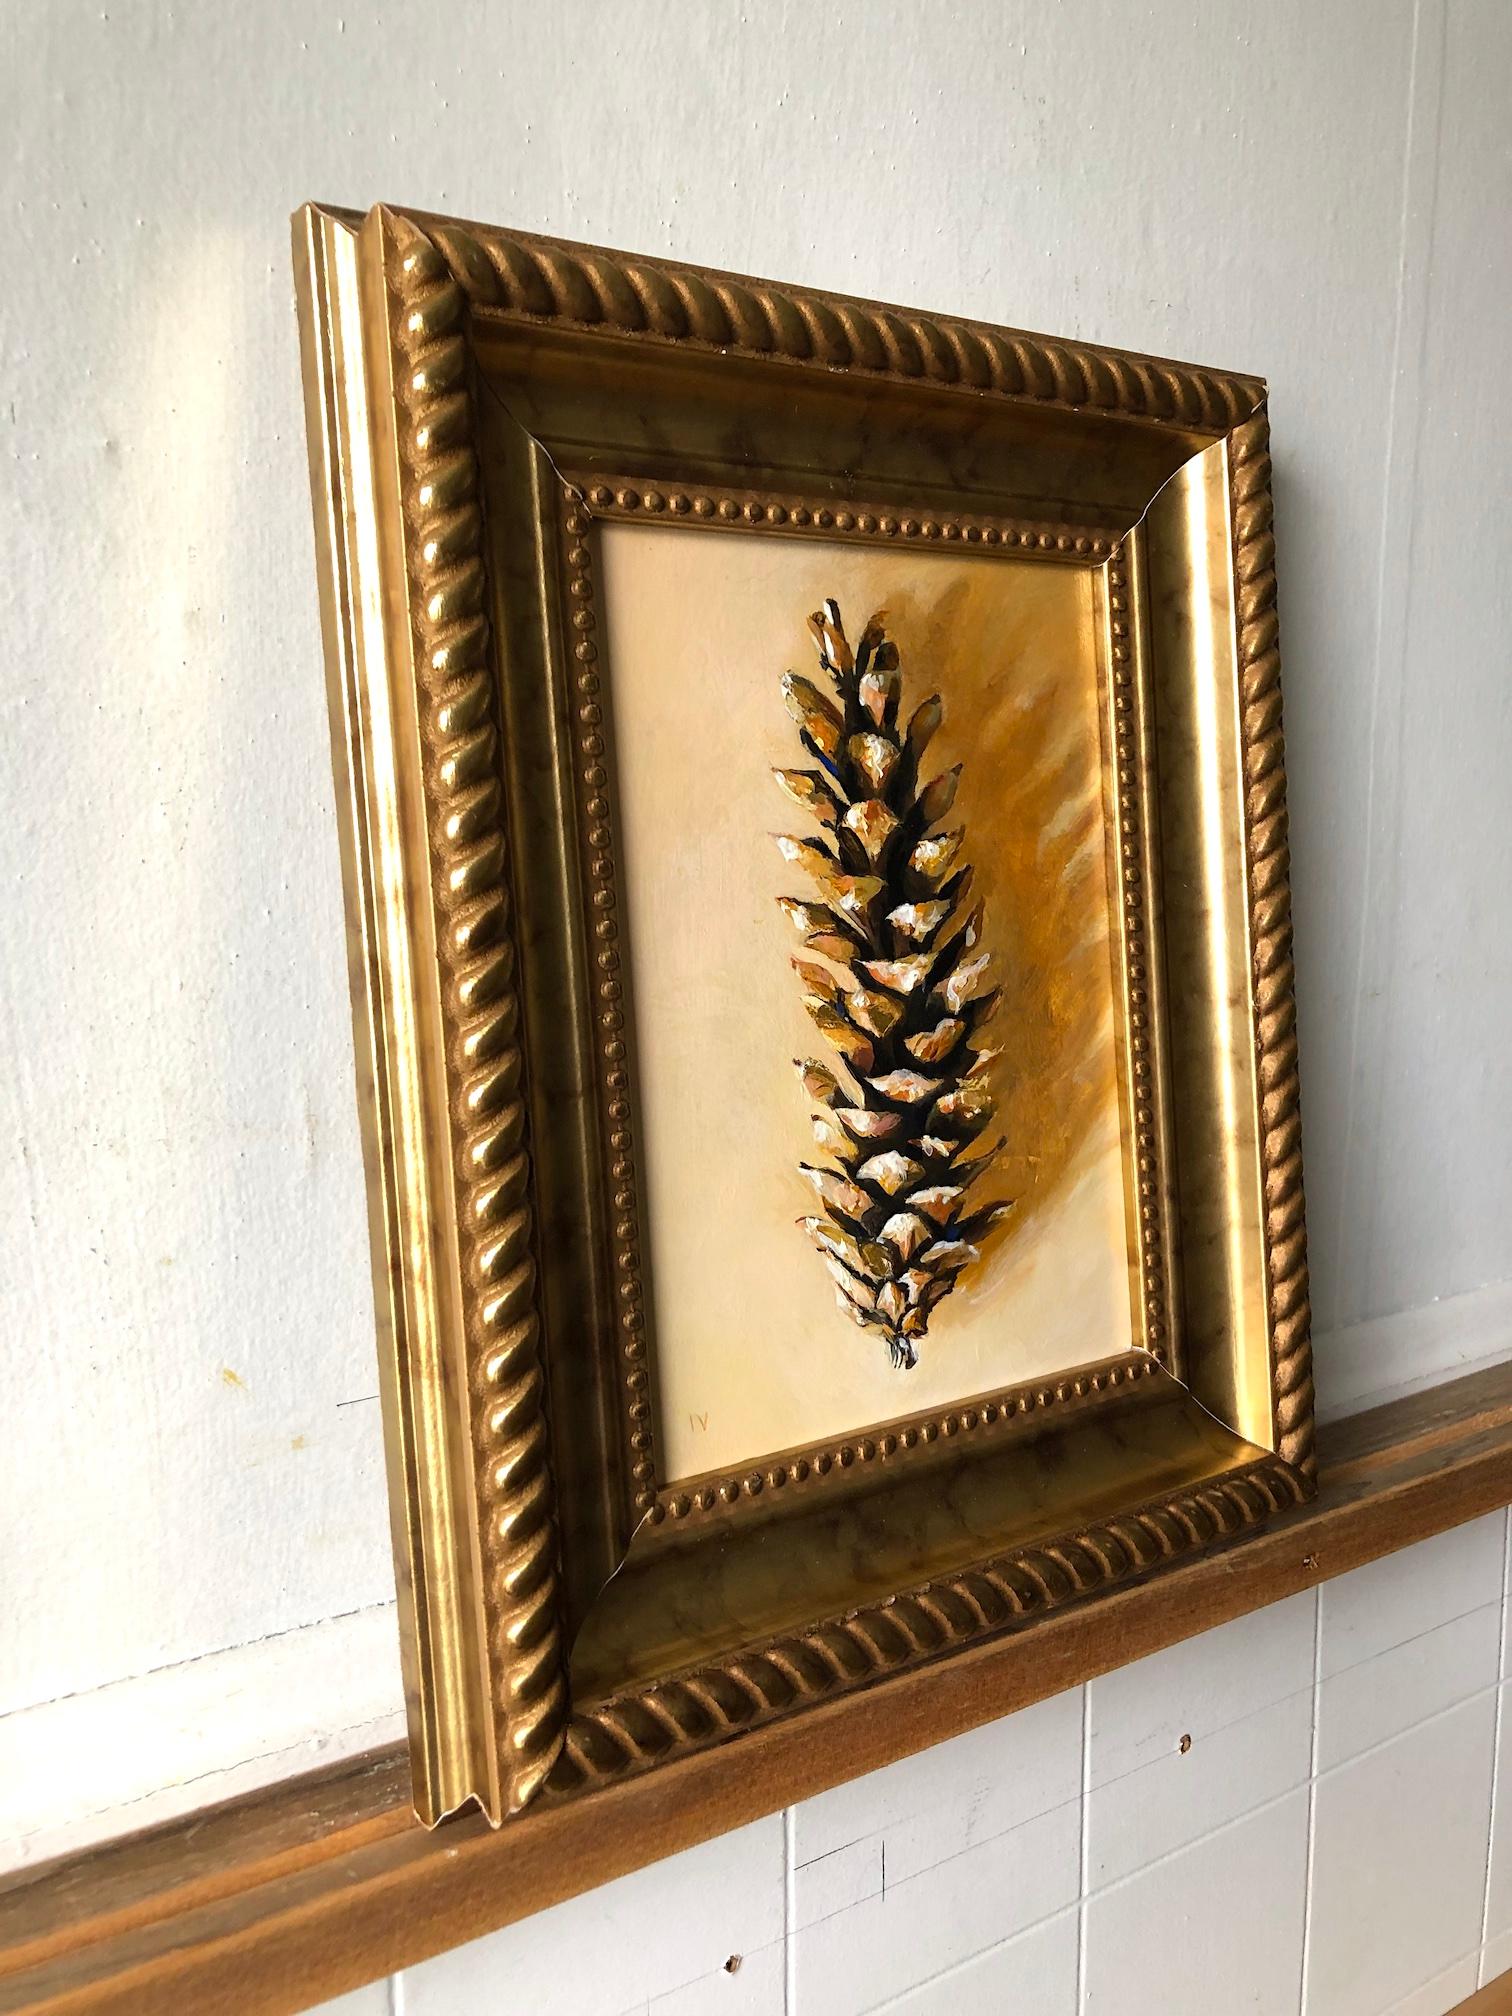 Pinecone #5 (Contemporary Realist Still Life Painting of Pinecone w/ Gold Leaf) 3